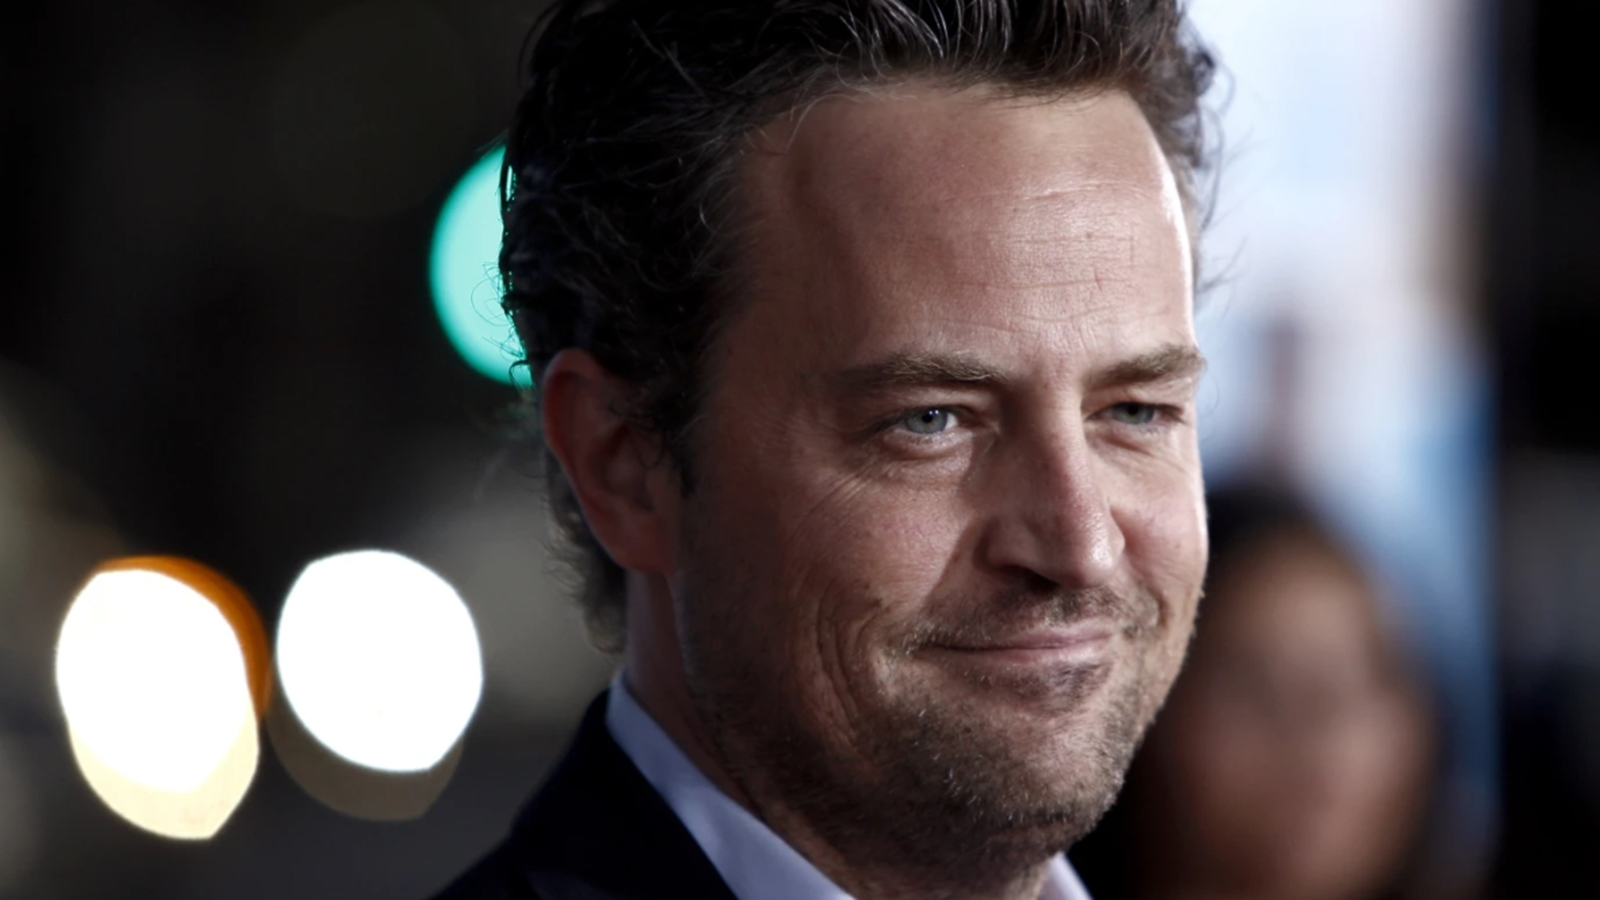 Matthew Perry’s X Account Was Hacked and a Fake Charity Scam Was Initiated